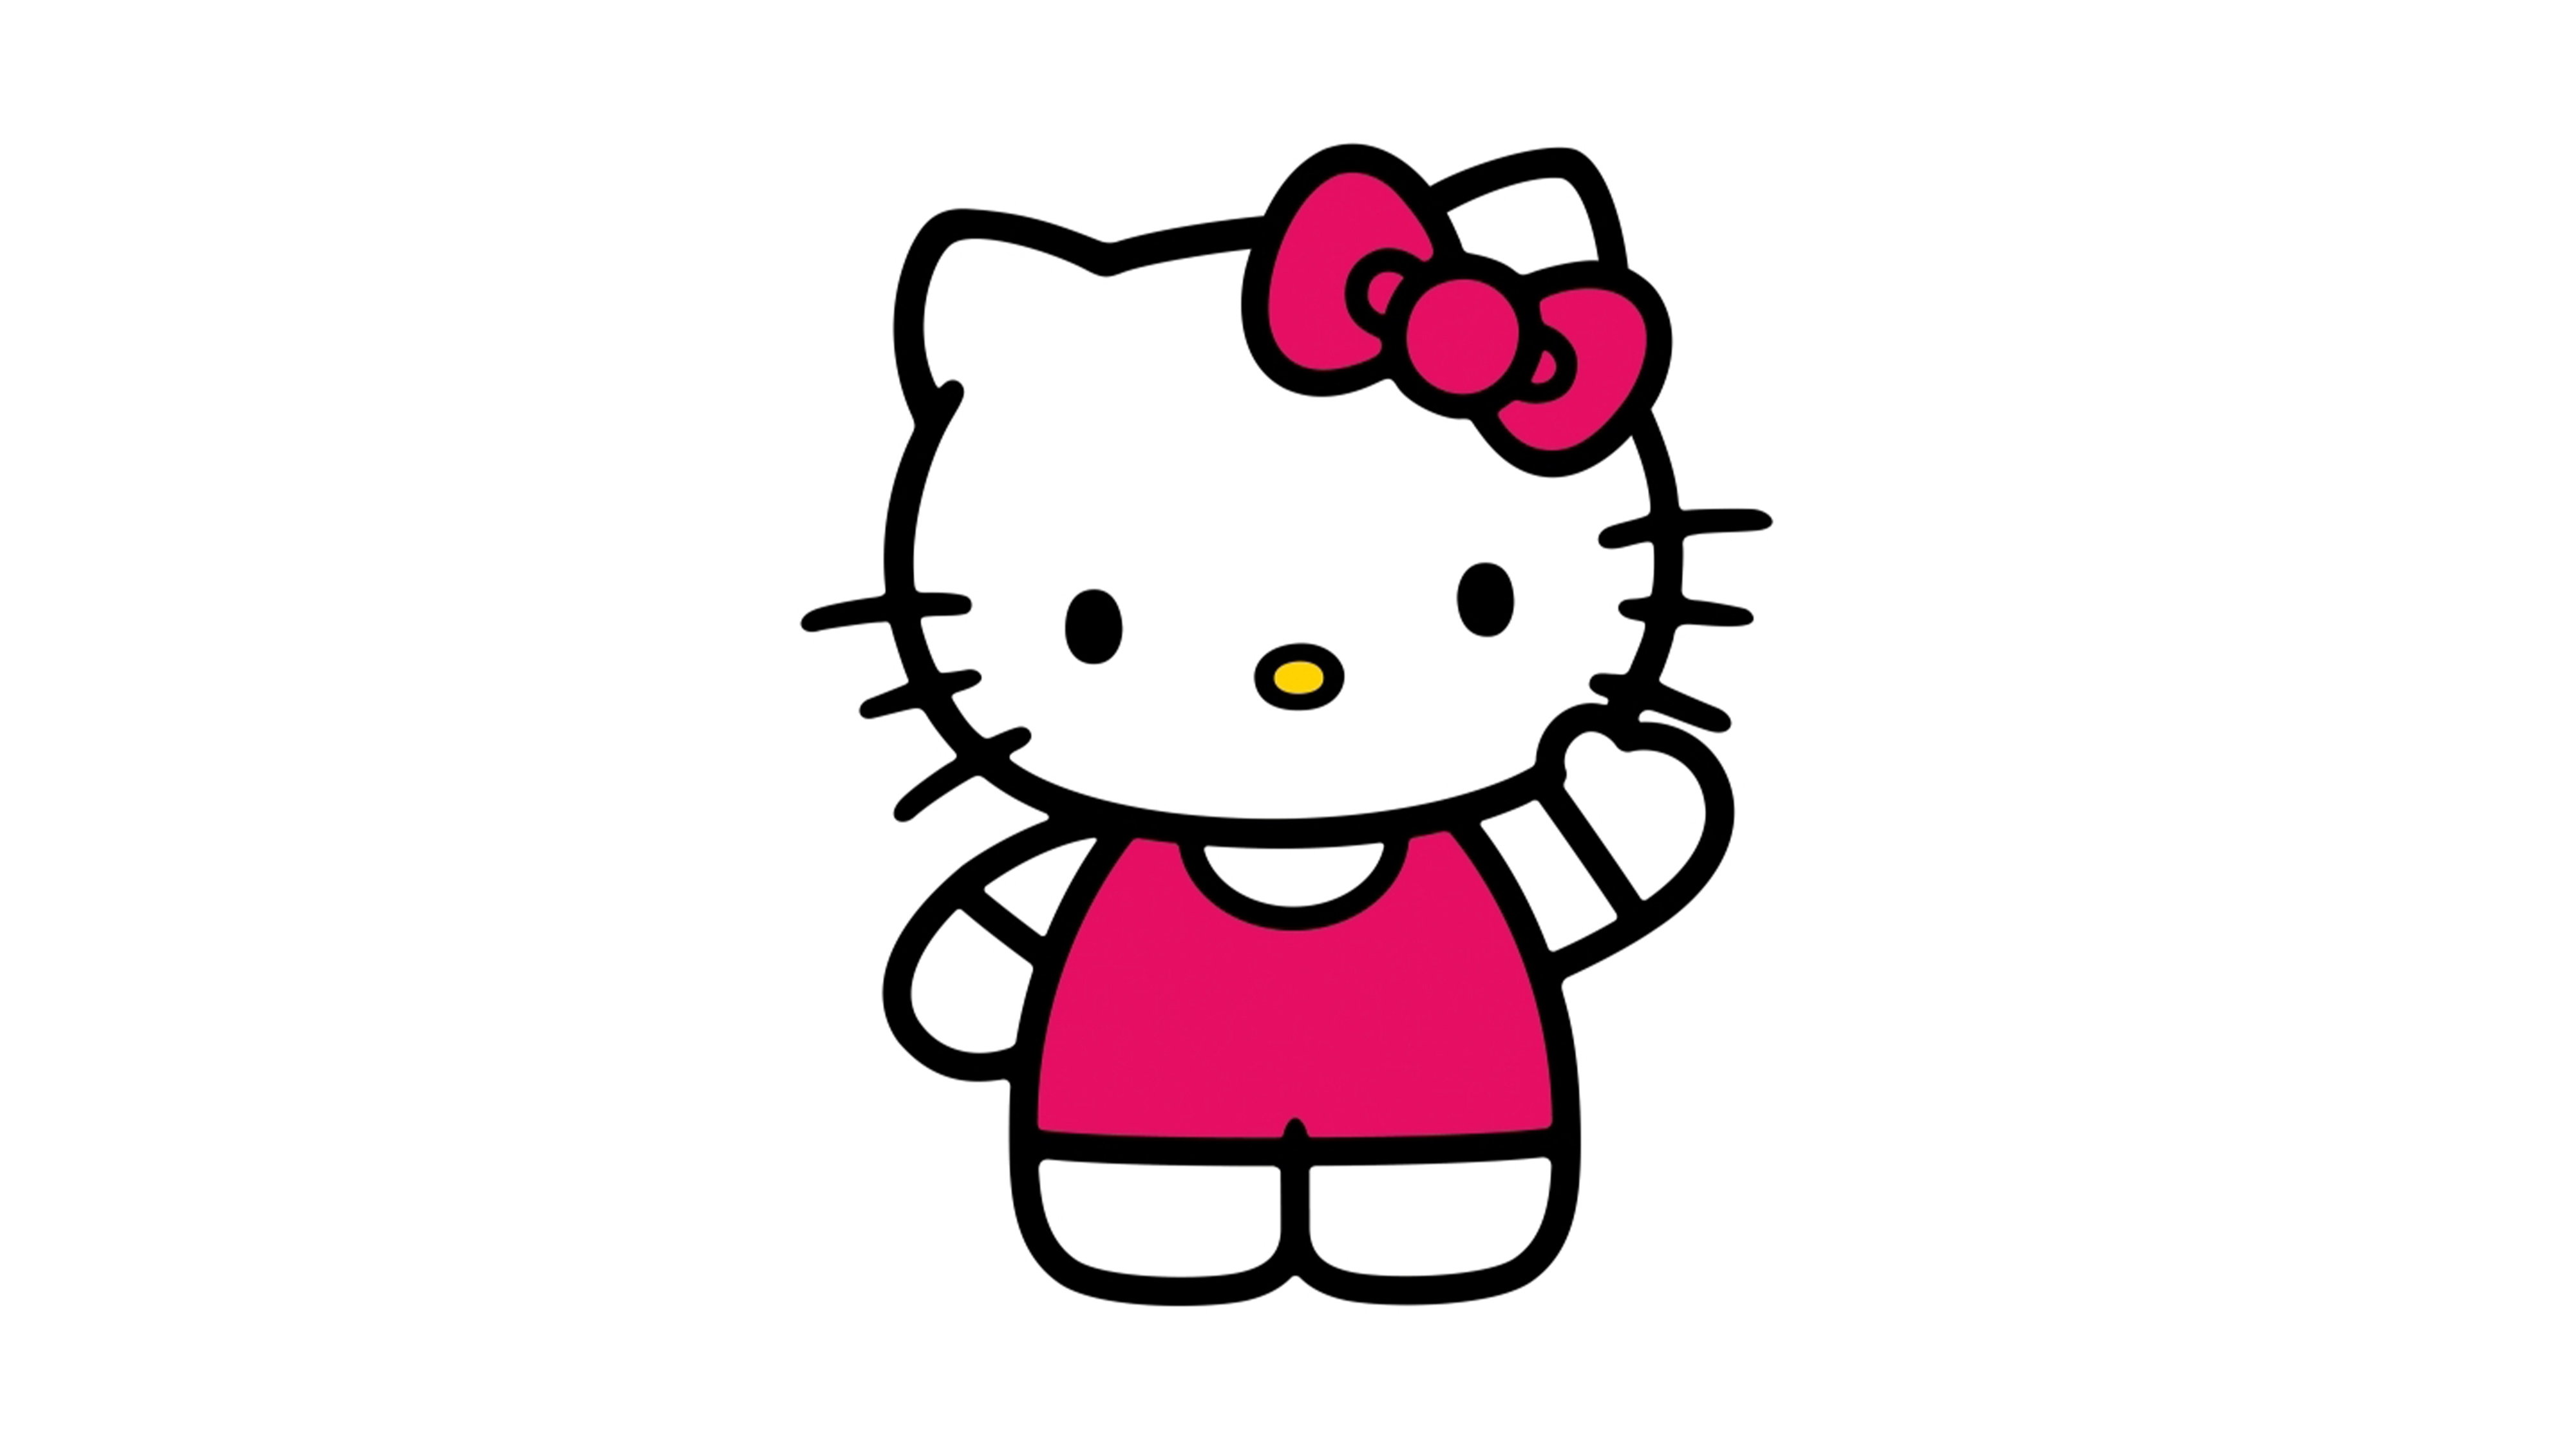 Hello Kitty isn't a cat, but is anything really anything anymore, man?